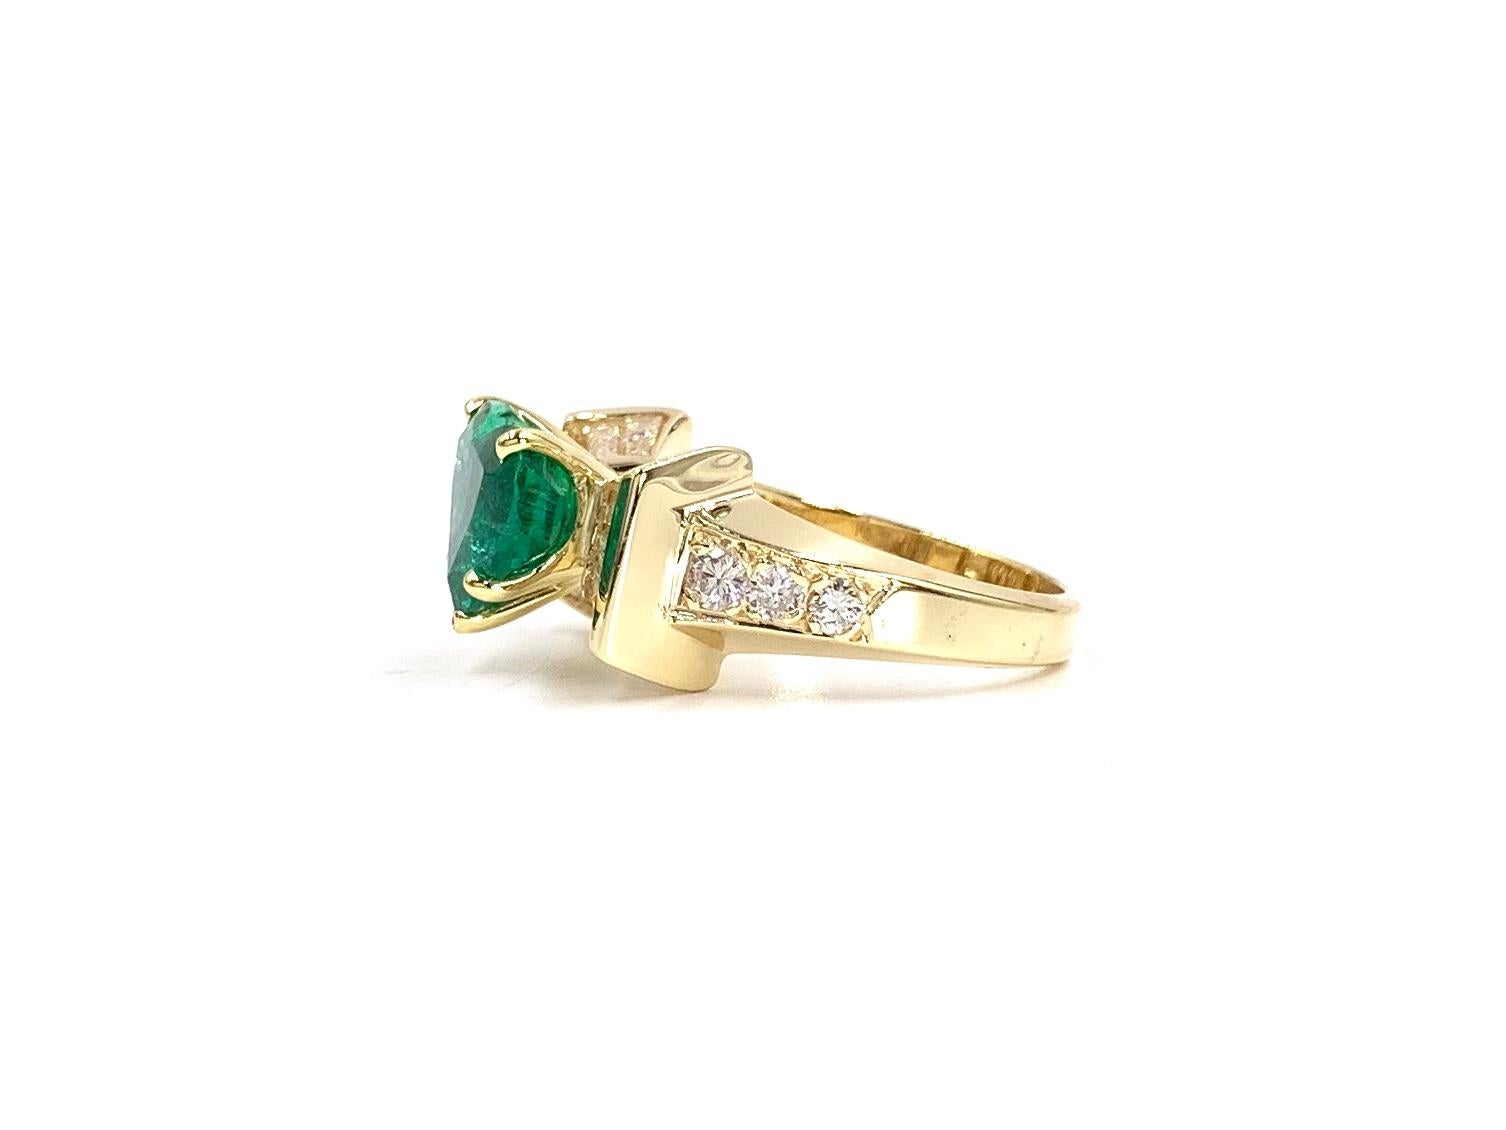 18 Karat Heart Shape Emerald and Diamond Ring In Excellent Condition For Sale In Pikesville, MD